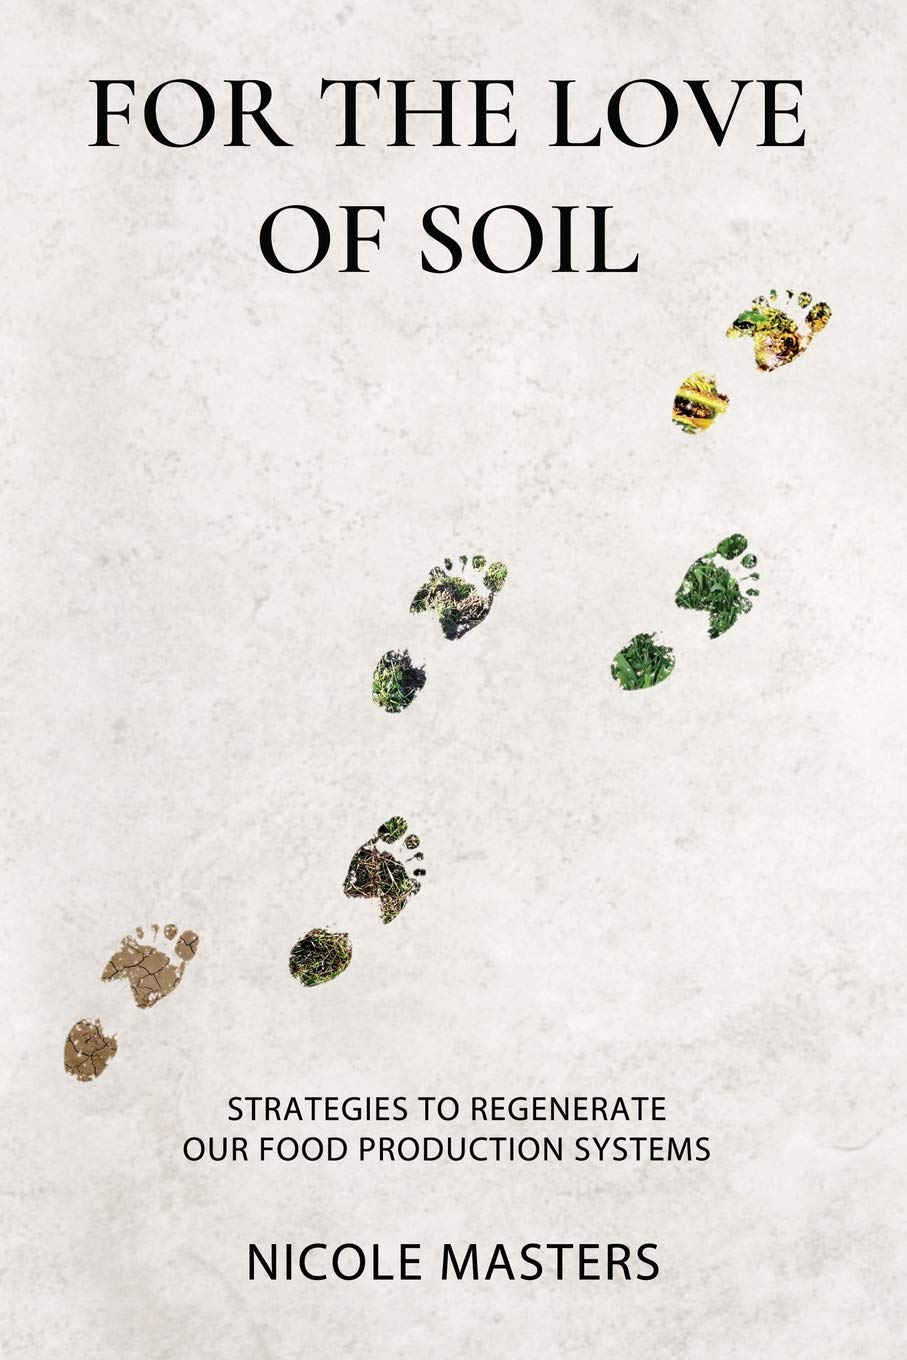 For the Love of Soil, by Nicole Masters